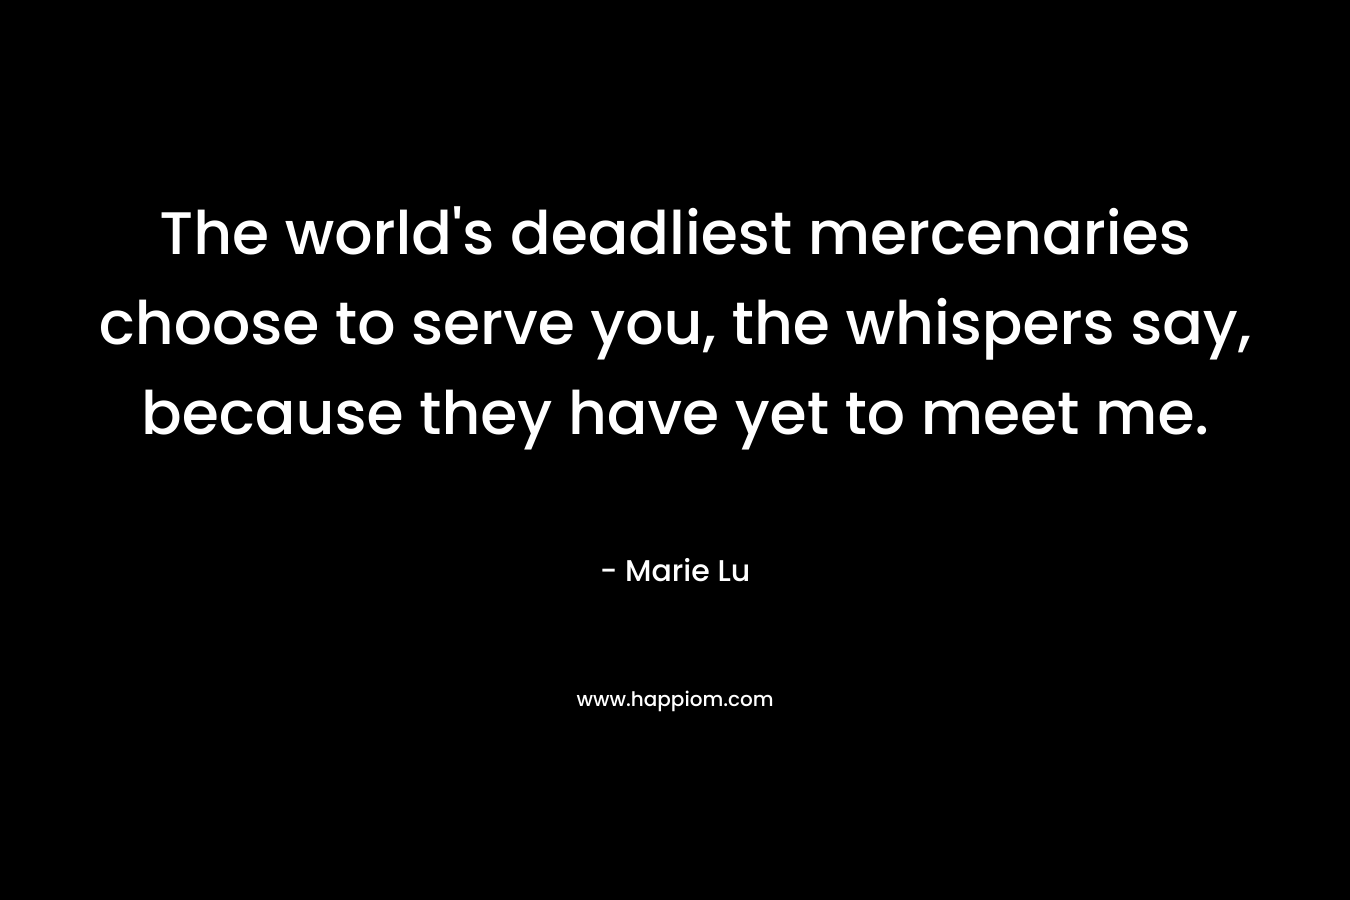 The world’s deadliest mercenaries choose to serve you, the whispers say, because they have yet to meet me. – Marie Lu